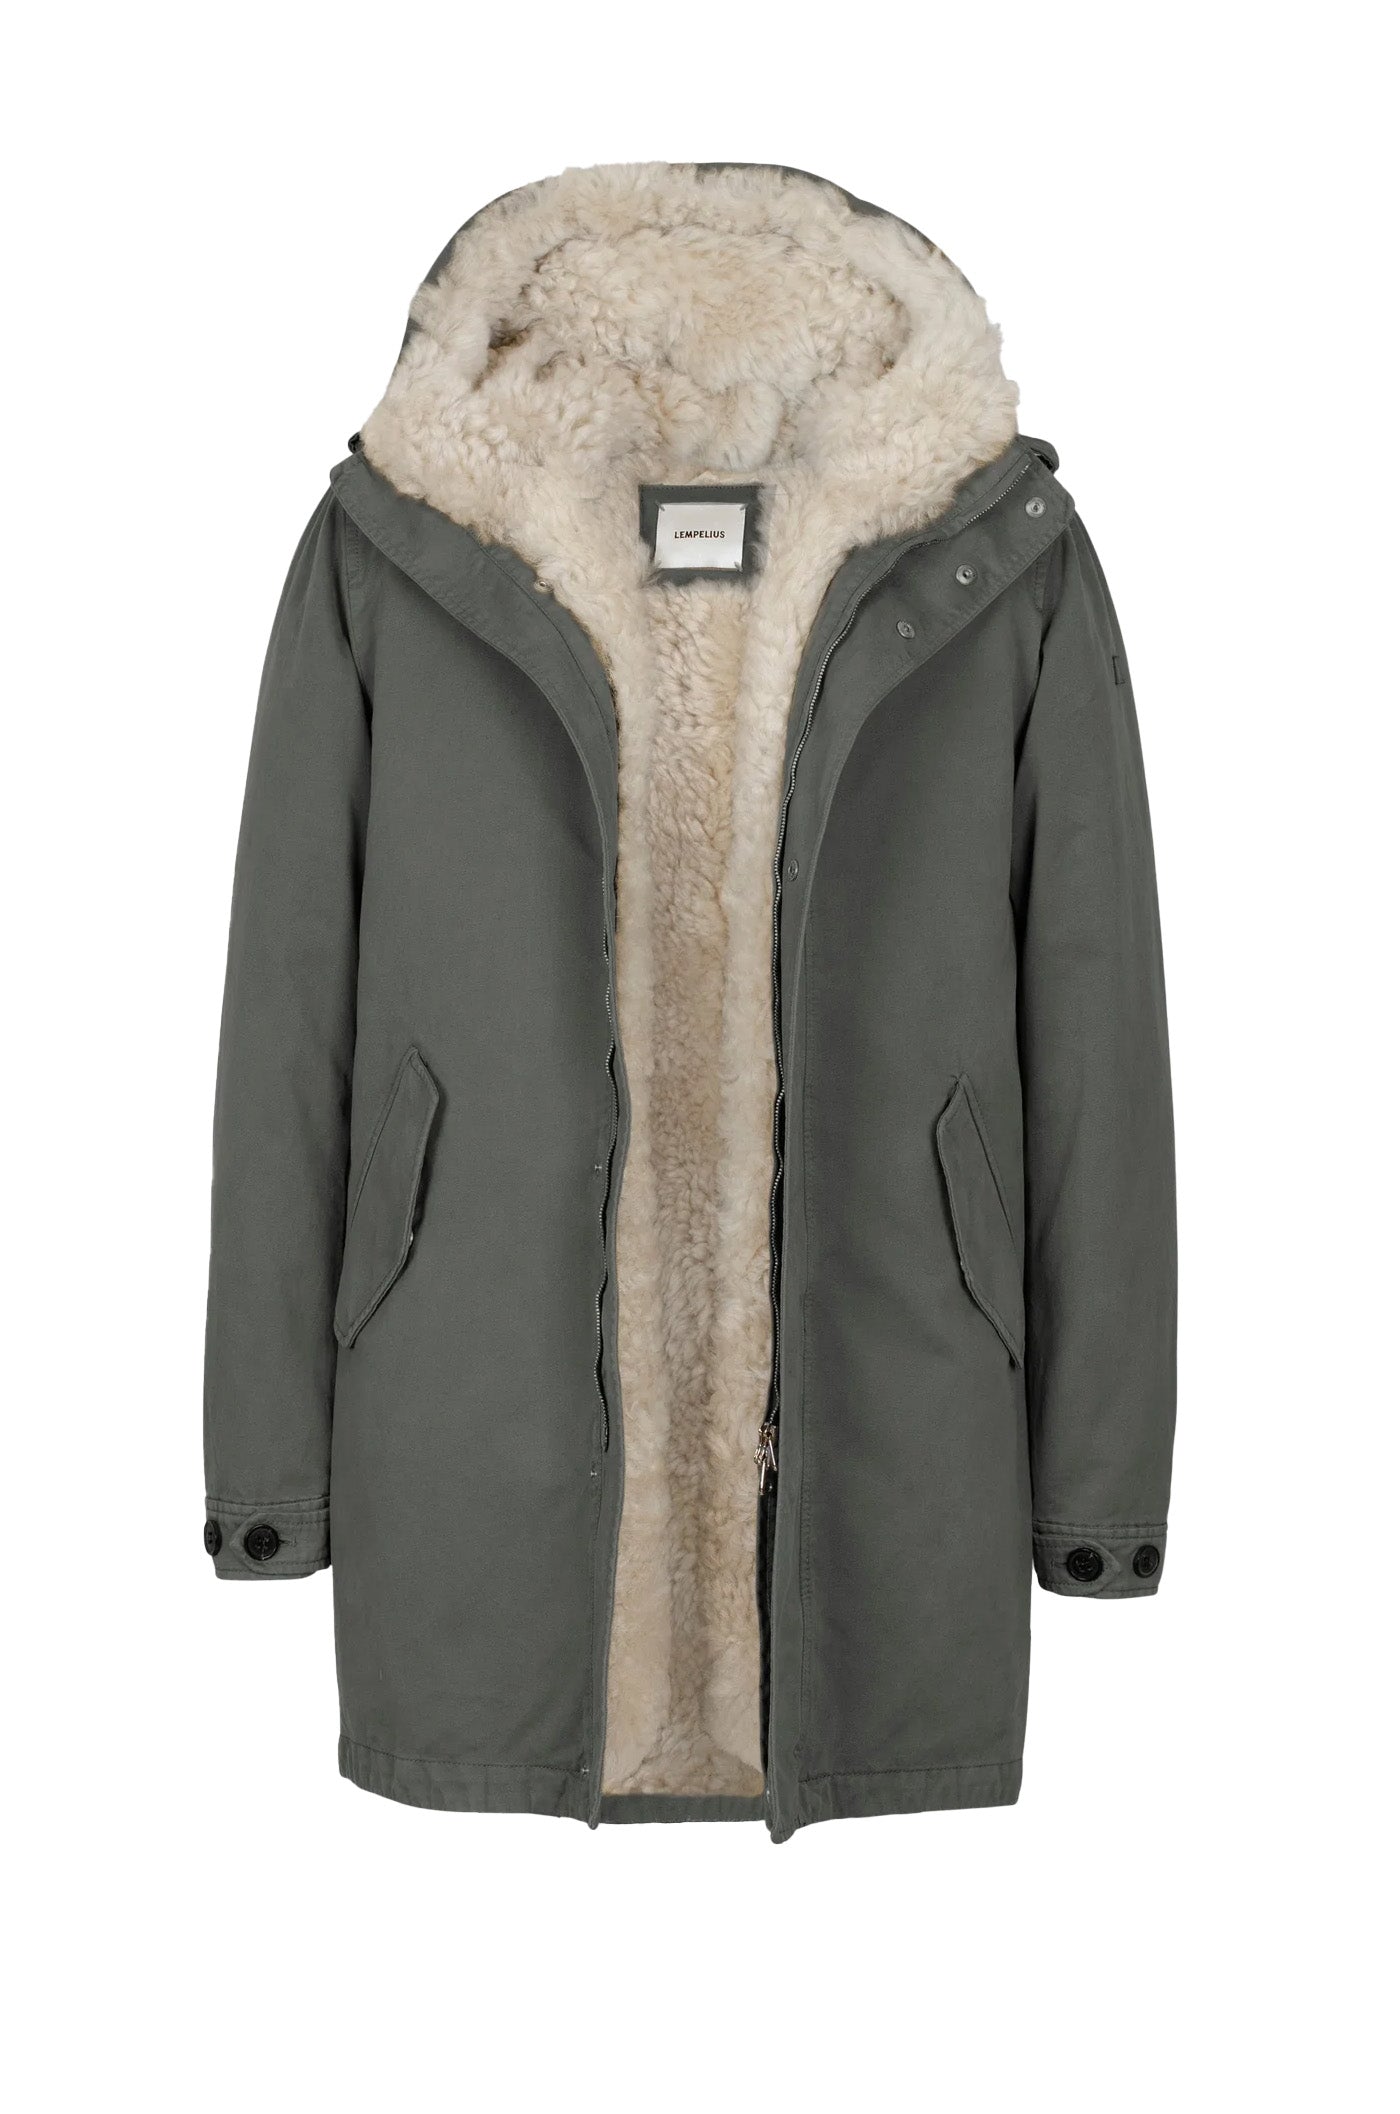 shearling Lempelius cotton Parka in military green